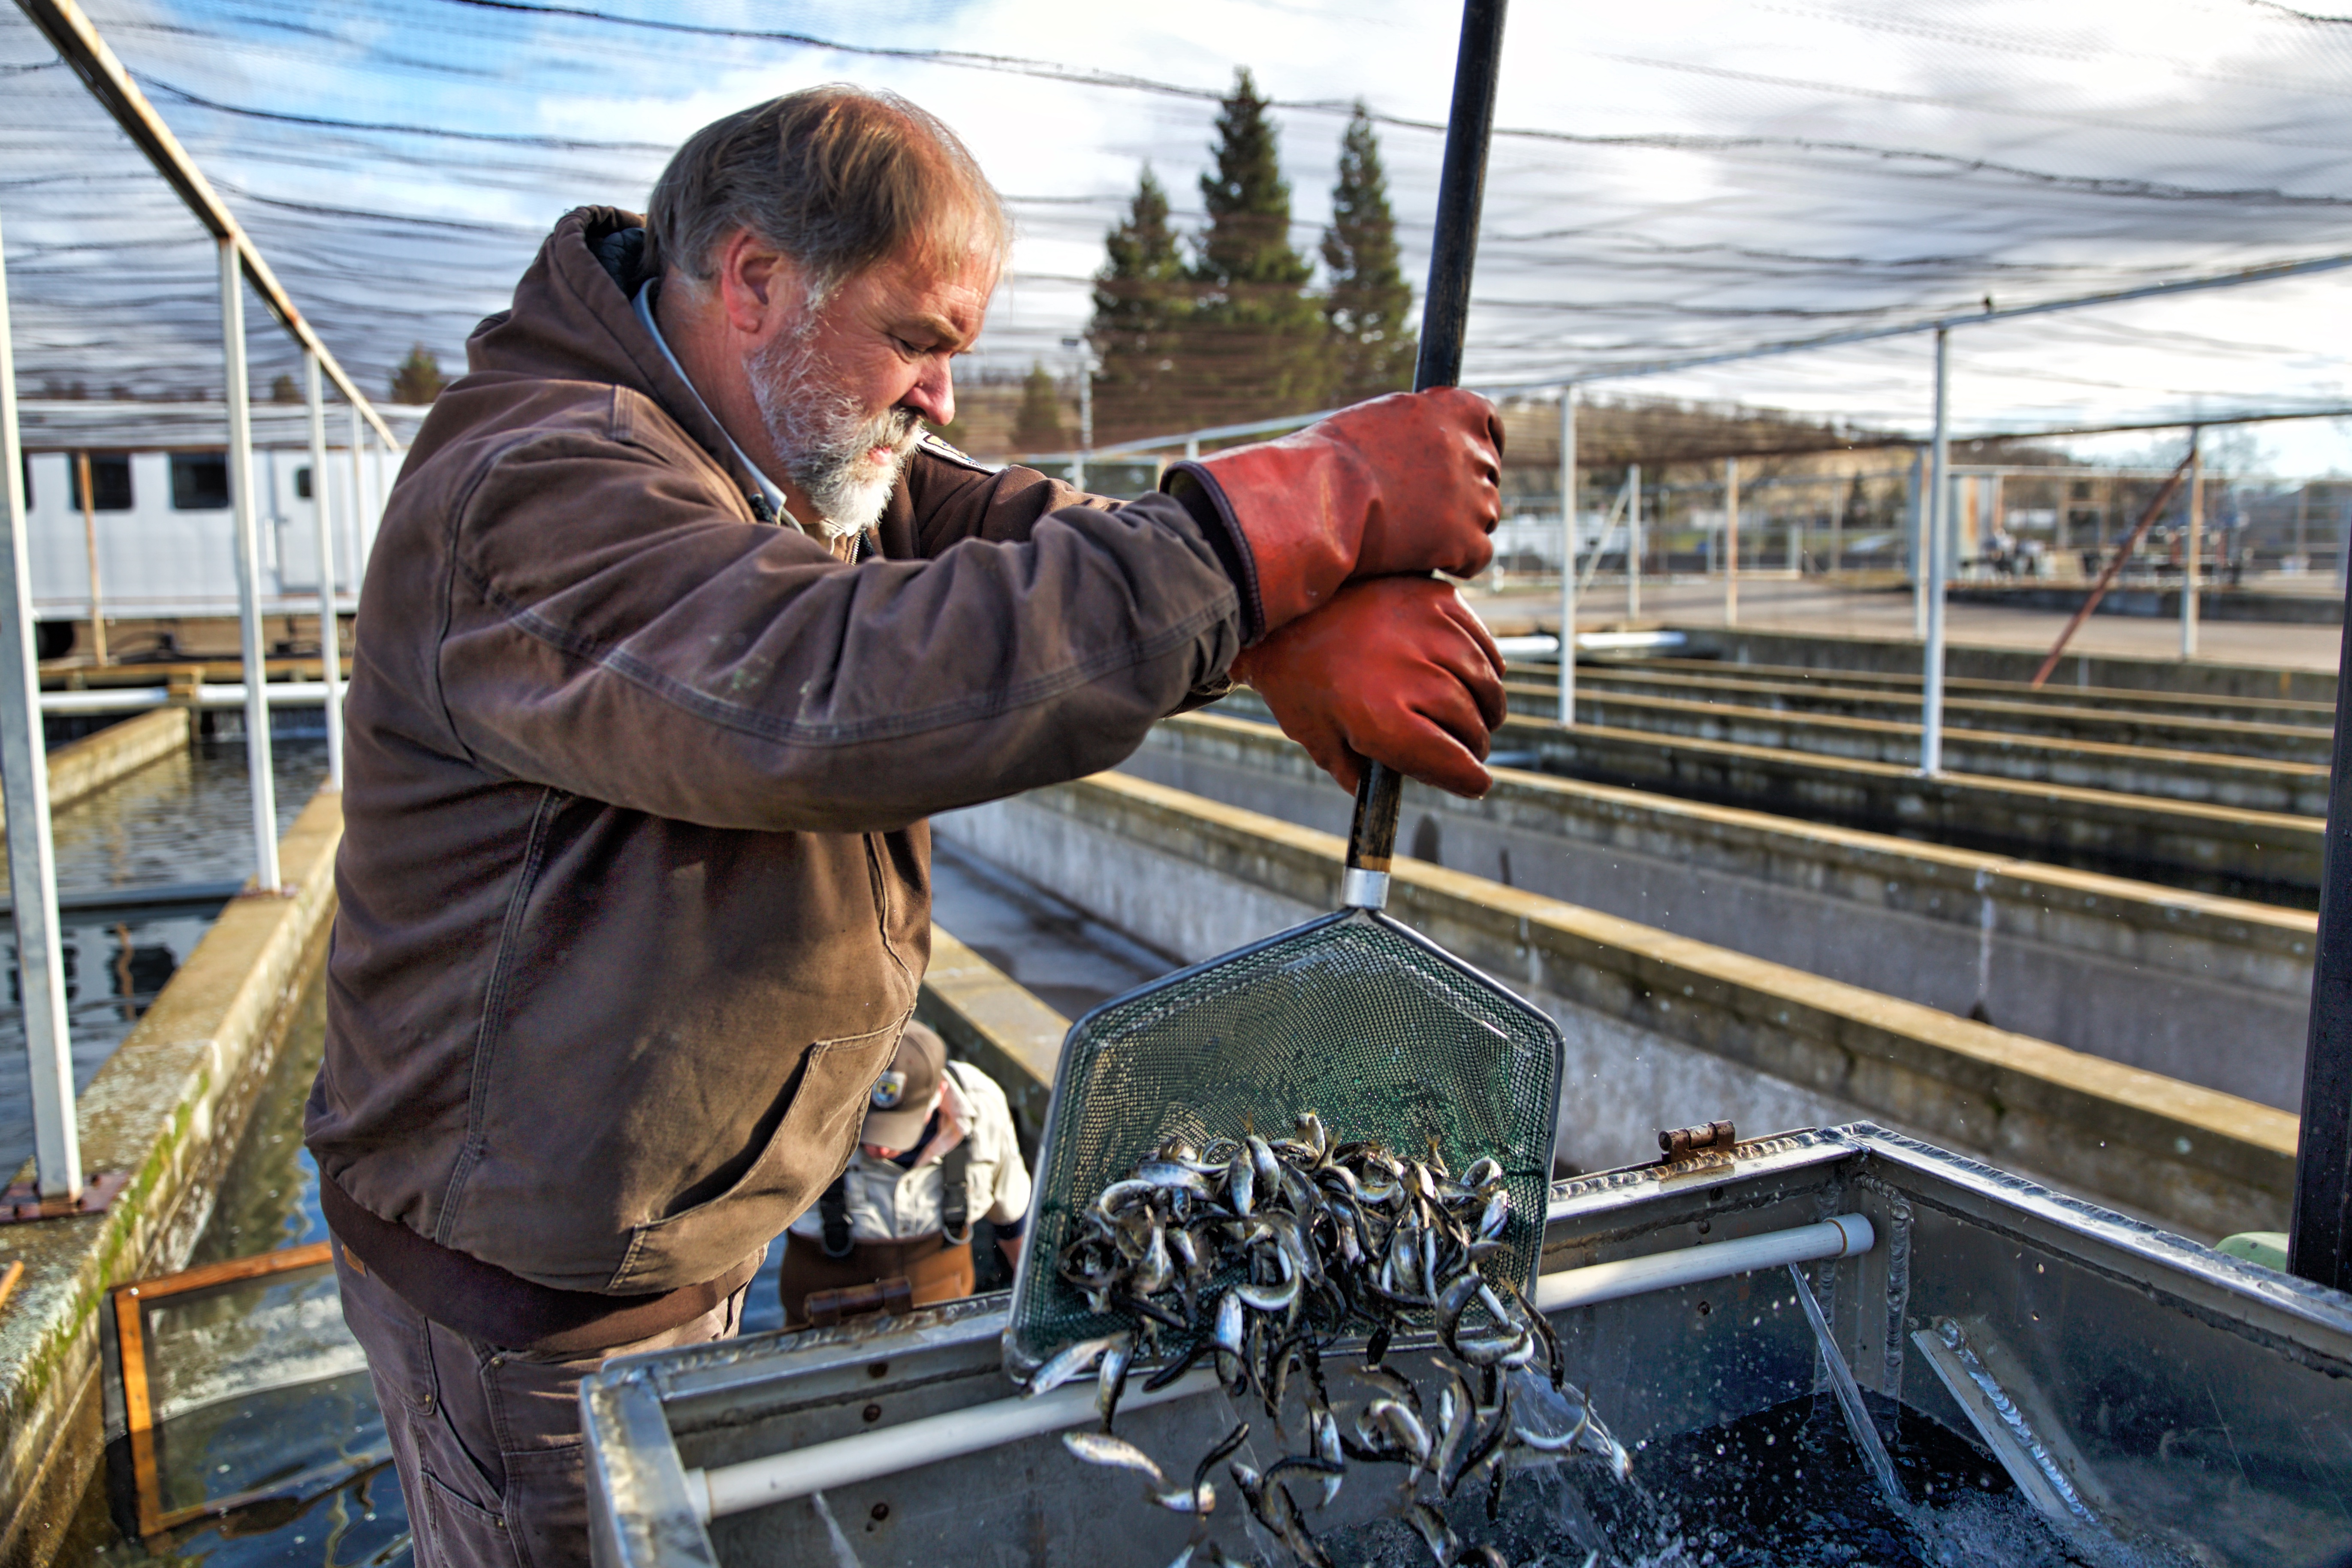 A man uses a net to place a group of juvenile fish into an outdoor tank